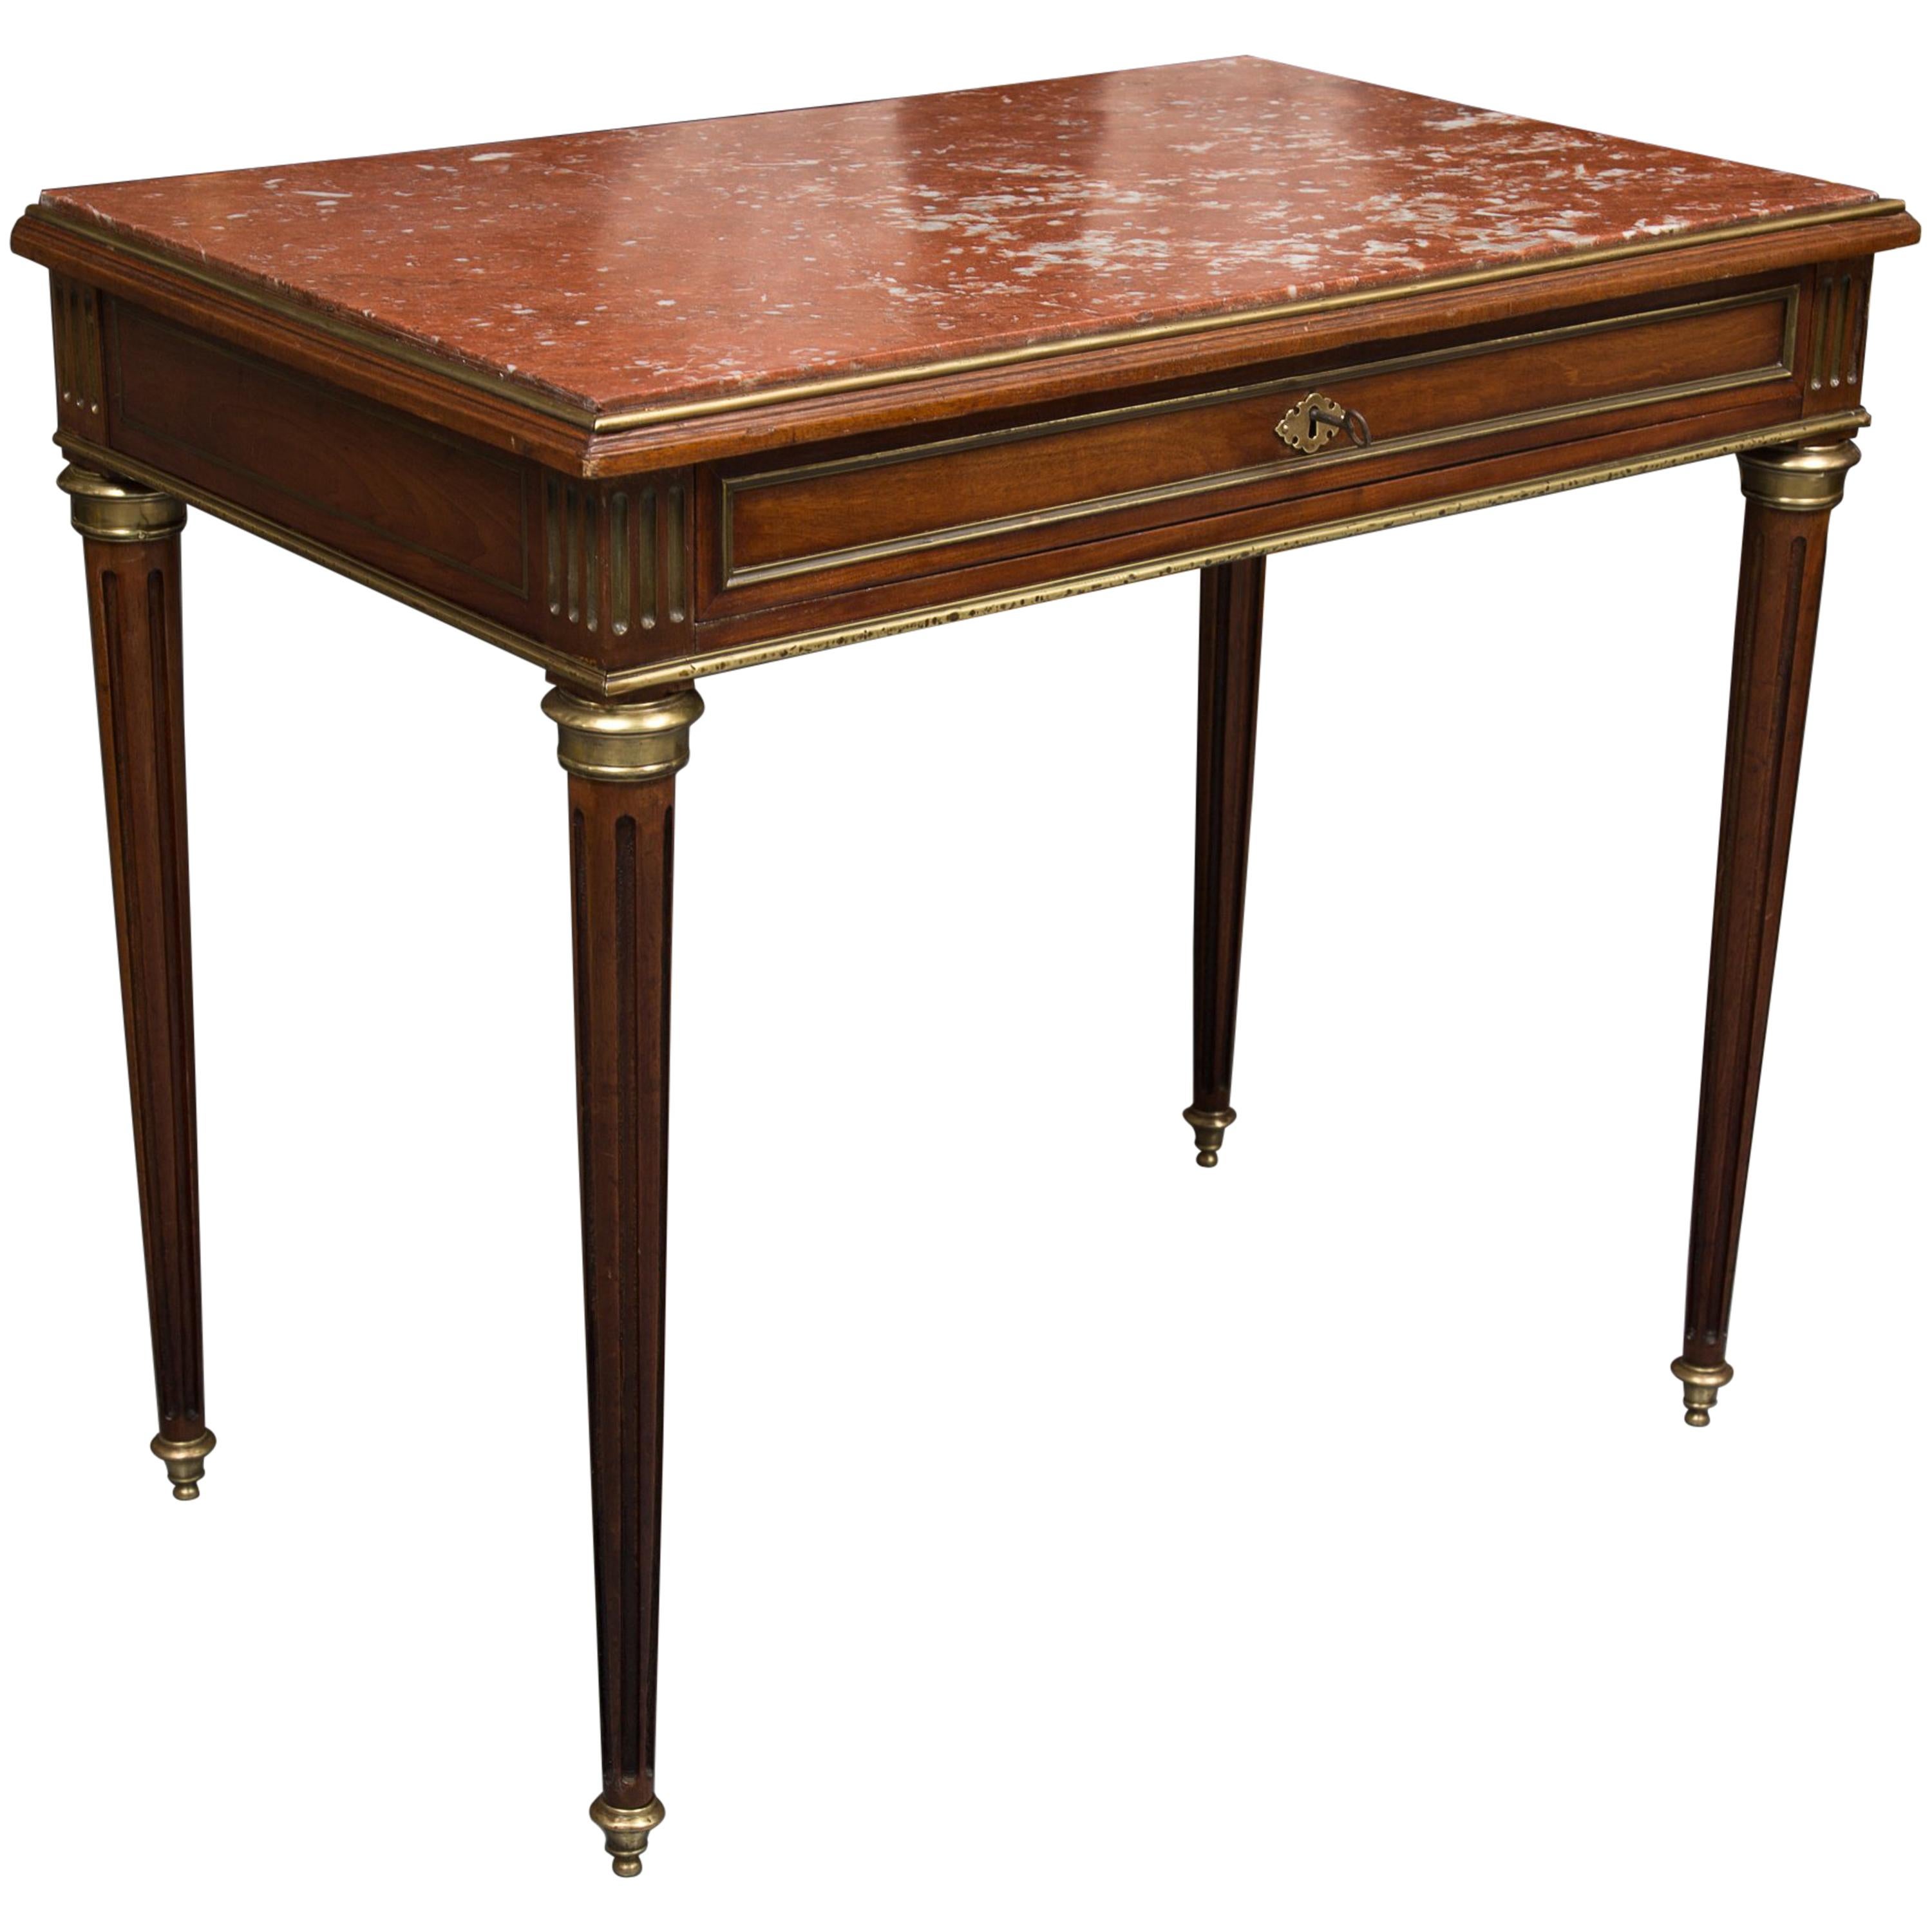 19th Century French Louis XVI Style Walnut Writing or Side Table with Marble Top